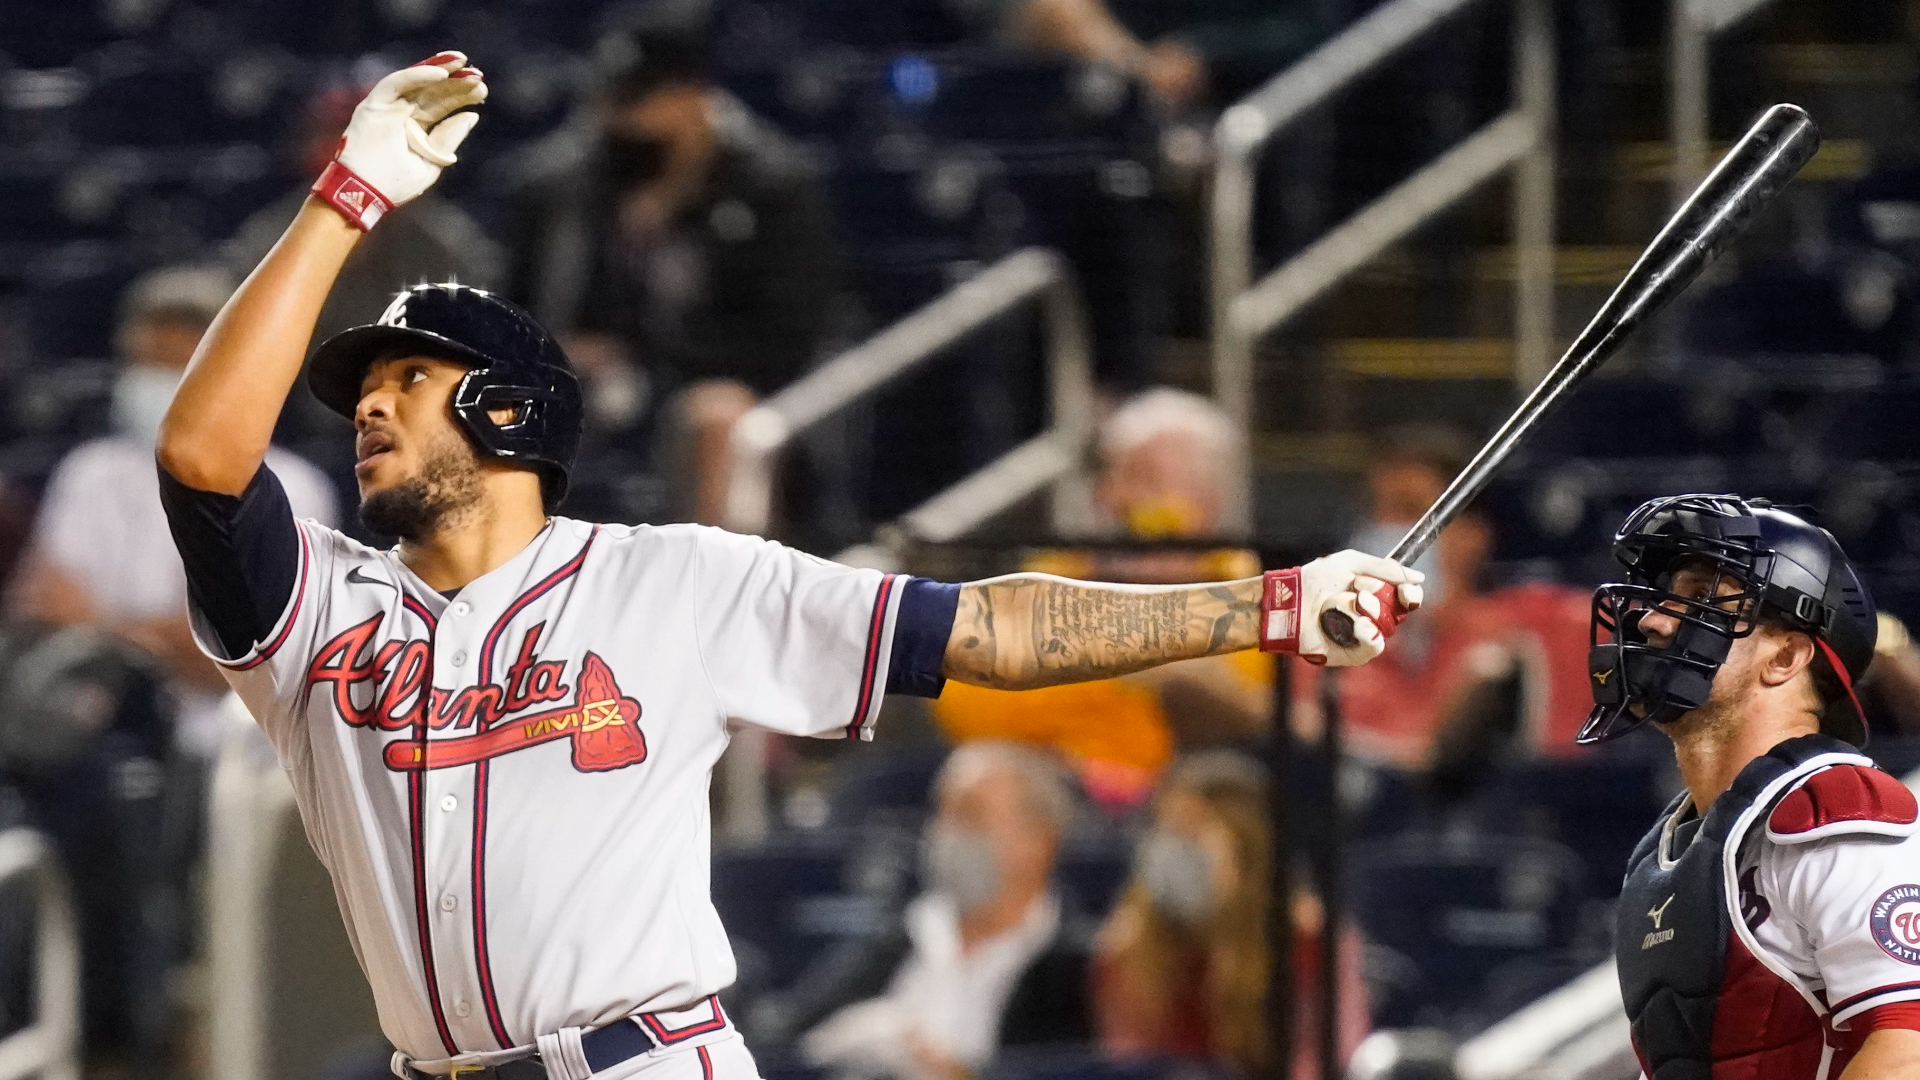 Minnesota Twins Acquire Jaime Garcia and Anthony Recker from Braves